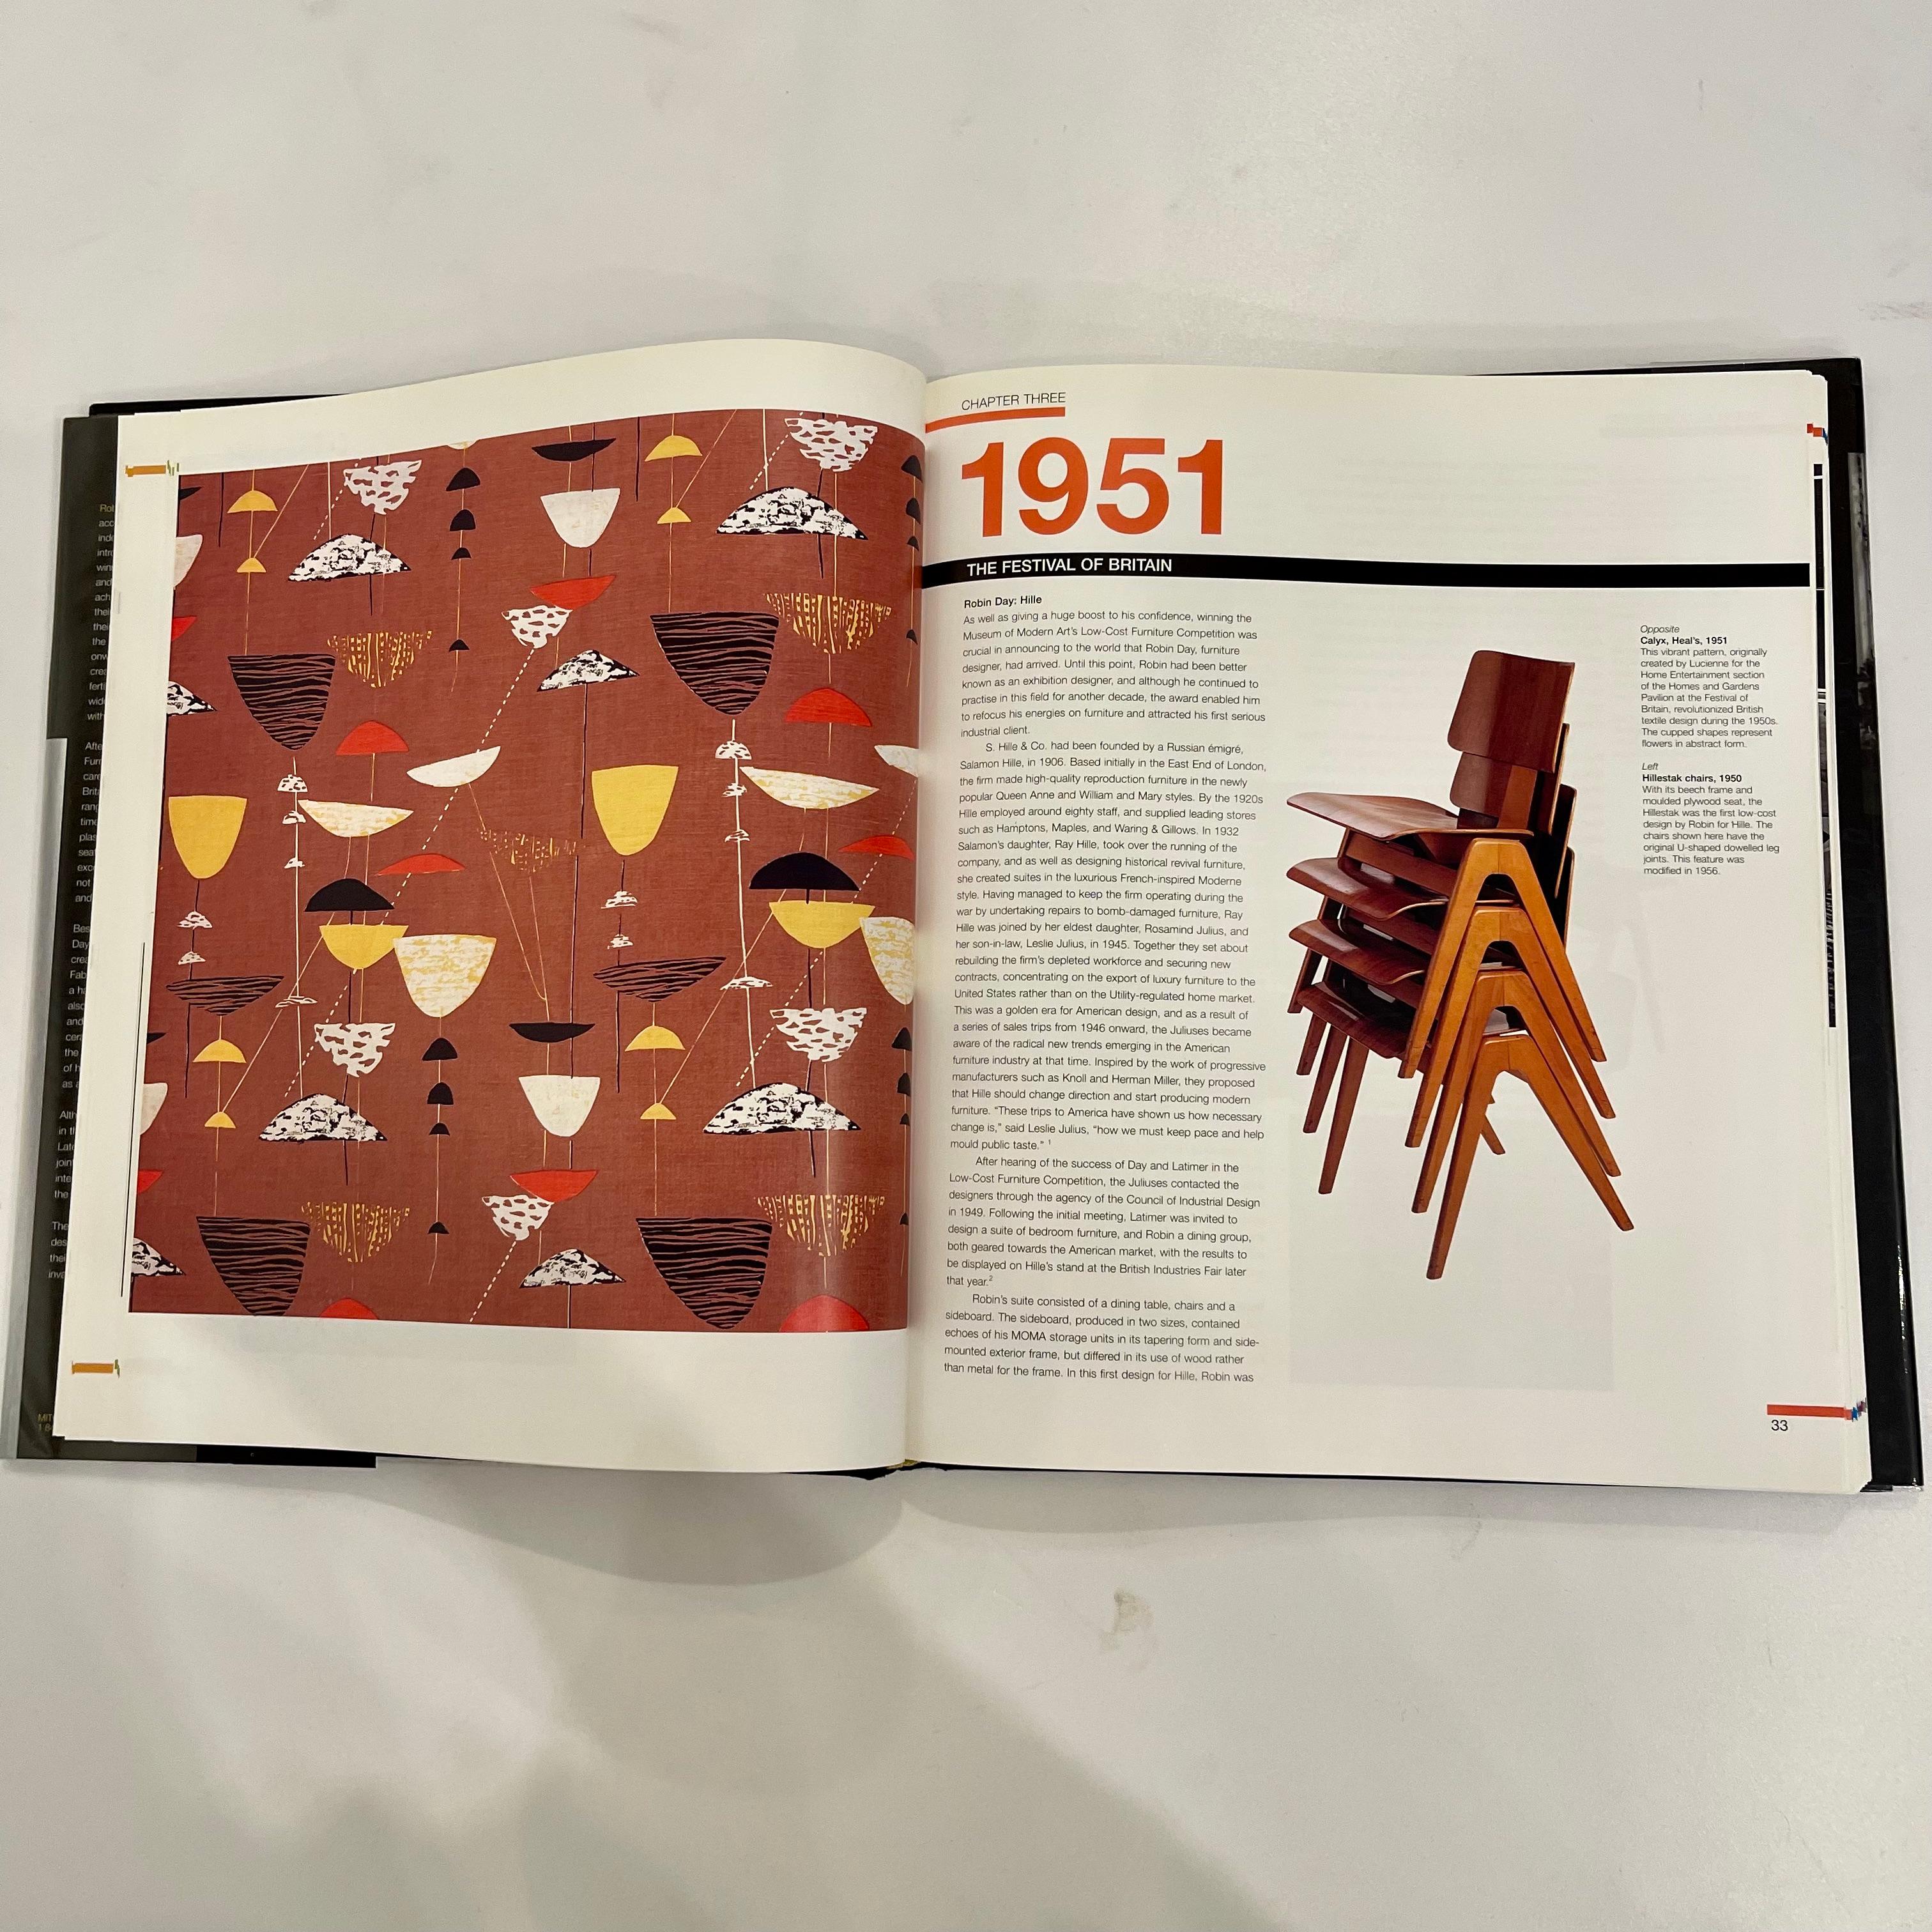 First edition, published by Mitchell Beazley, 2001. Text by Lesley Jackson.

A beautifully designed and handsomely illustrated celebration of two of Britain’s most revered and accomplished designers in the post-war period. Robin and Lucienne Day